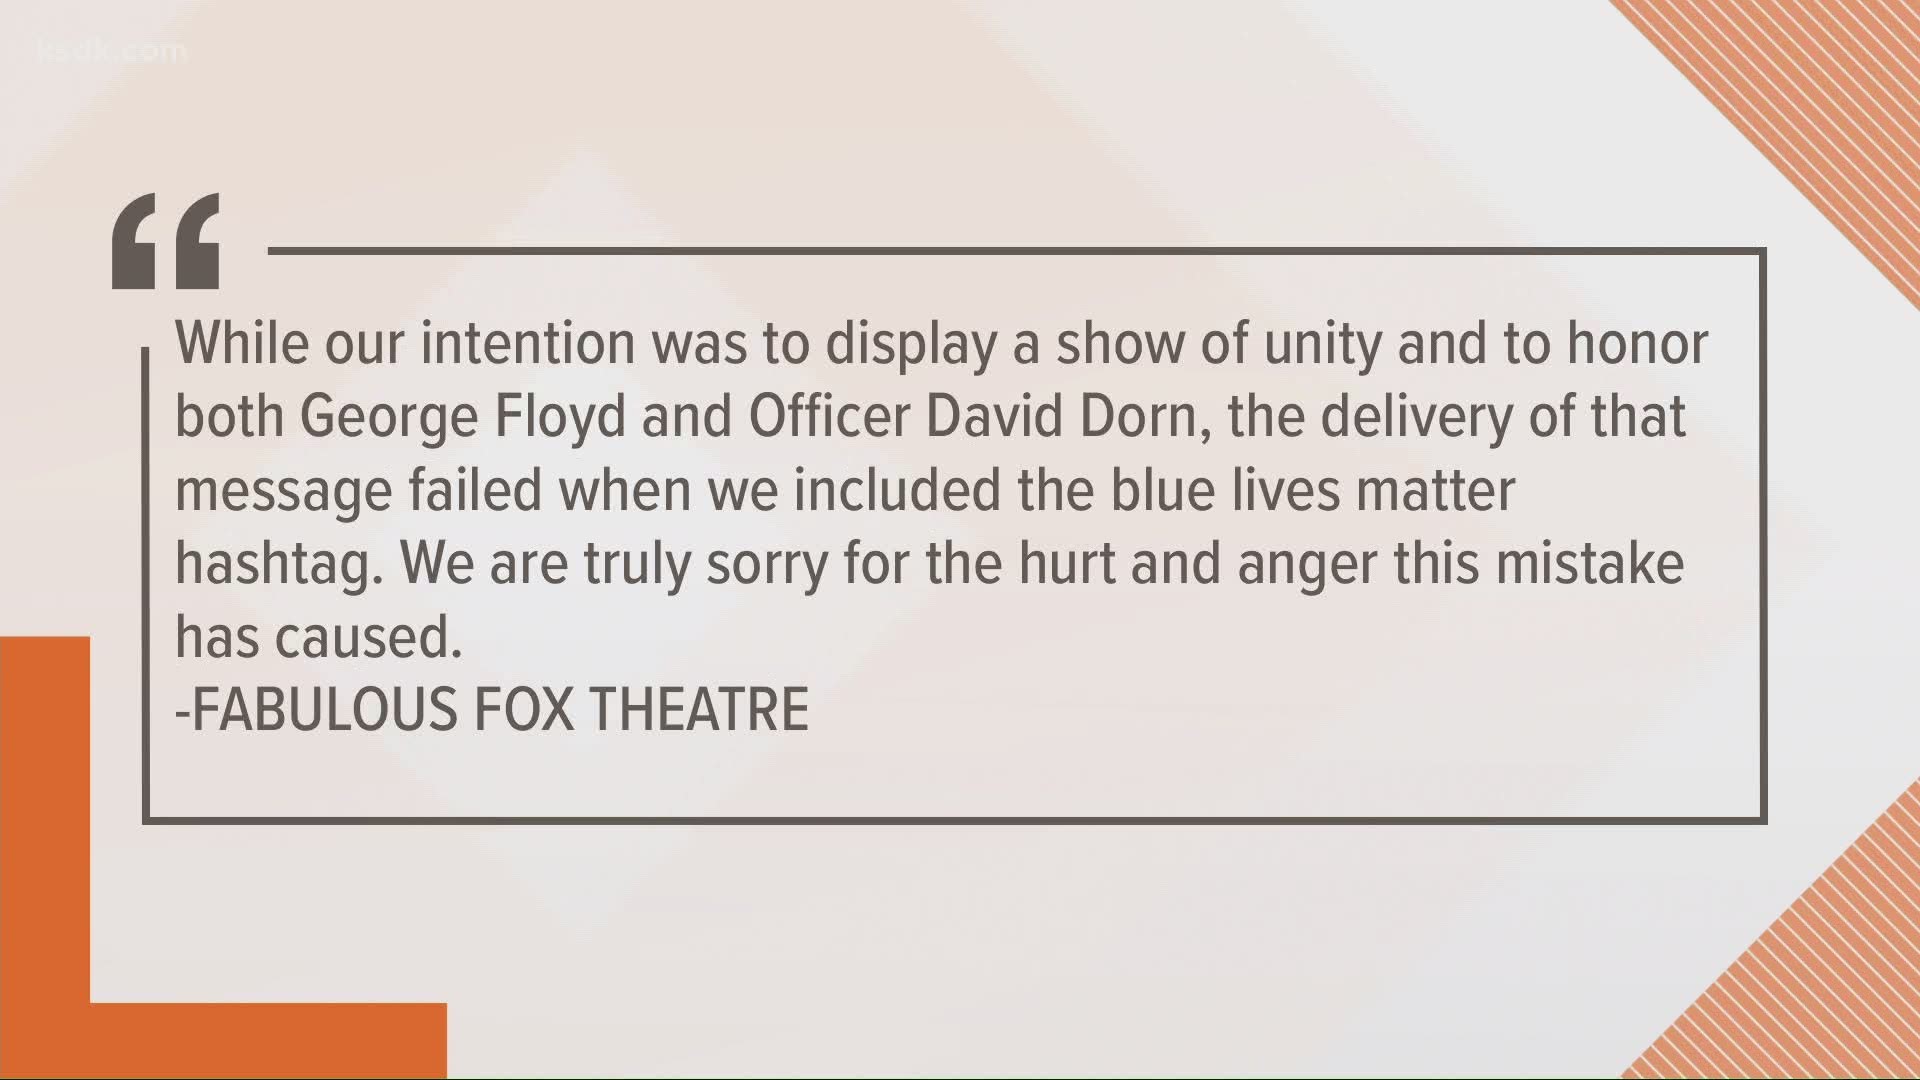 The theater had '#bluelivesmatter' on its marquee.